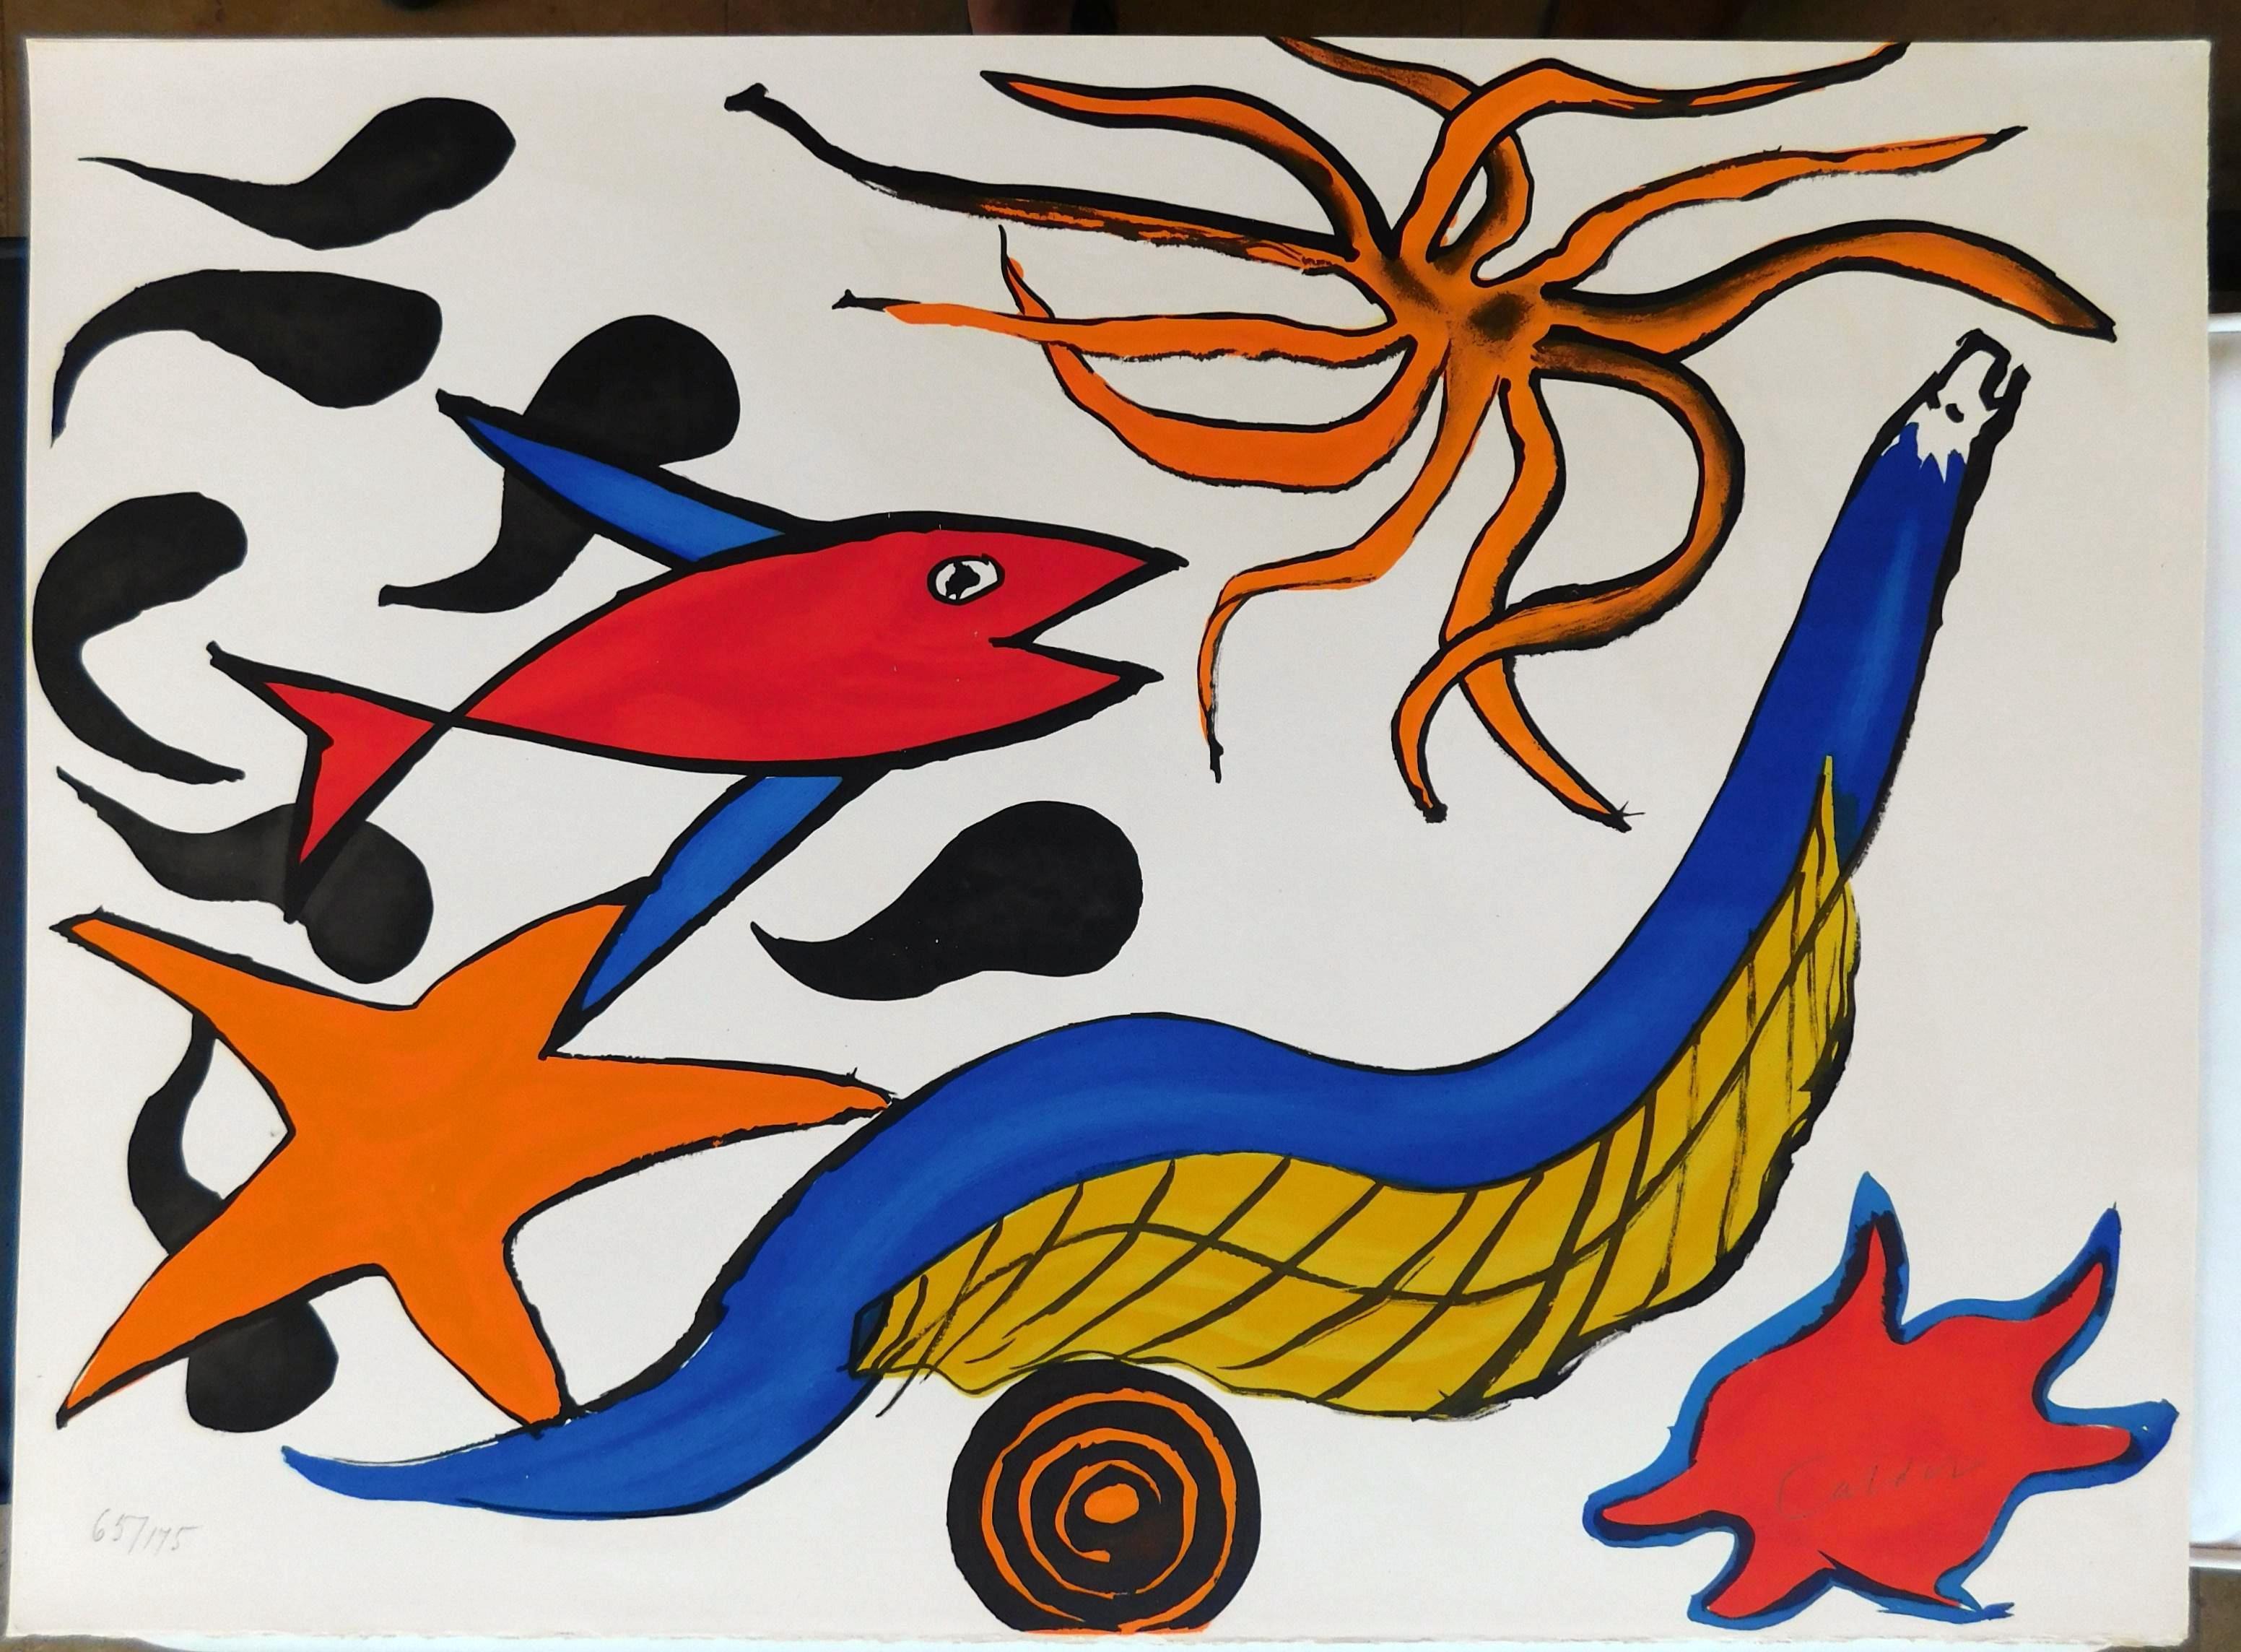 Artist: Alexander Calder
Medium: Lithograph
Title: (Untitled - Sea Creatures) 
Portfolio: Our Unfinished Revolution
Year: 1976
Edition: 65 of 175
Sheet Size: 22 x 30 inches
Signed: Signed in pencil lower right
Numbered: In pencil lower